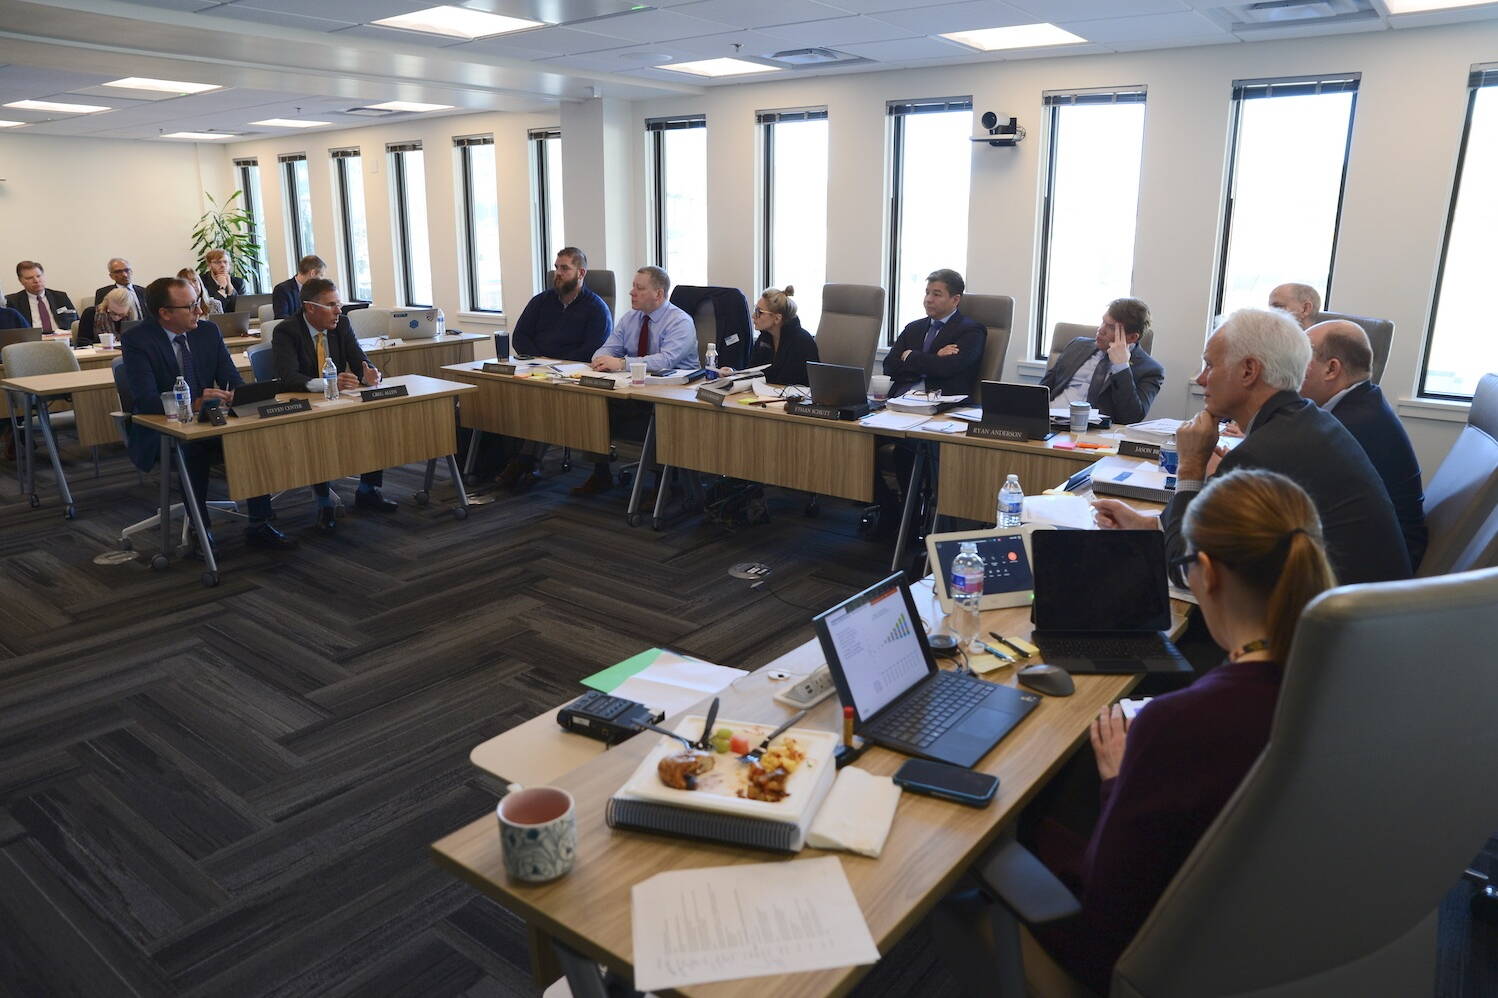 The trustees of the Alaska Permanent Fund Corp. are seen during a quarterly meeting at their Juneau headquarters on Friday. (Photo by James Brooks/Alaska Beacon)